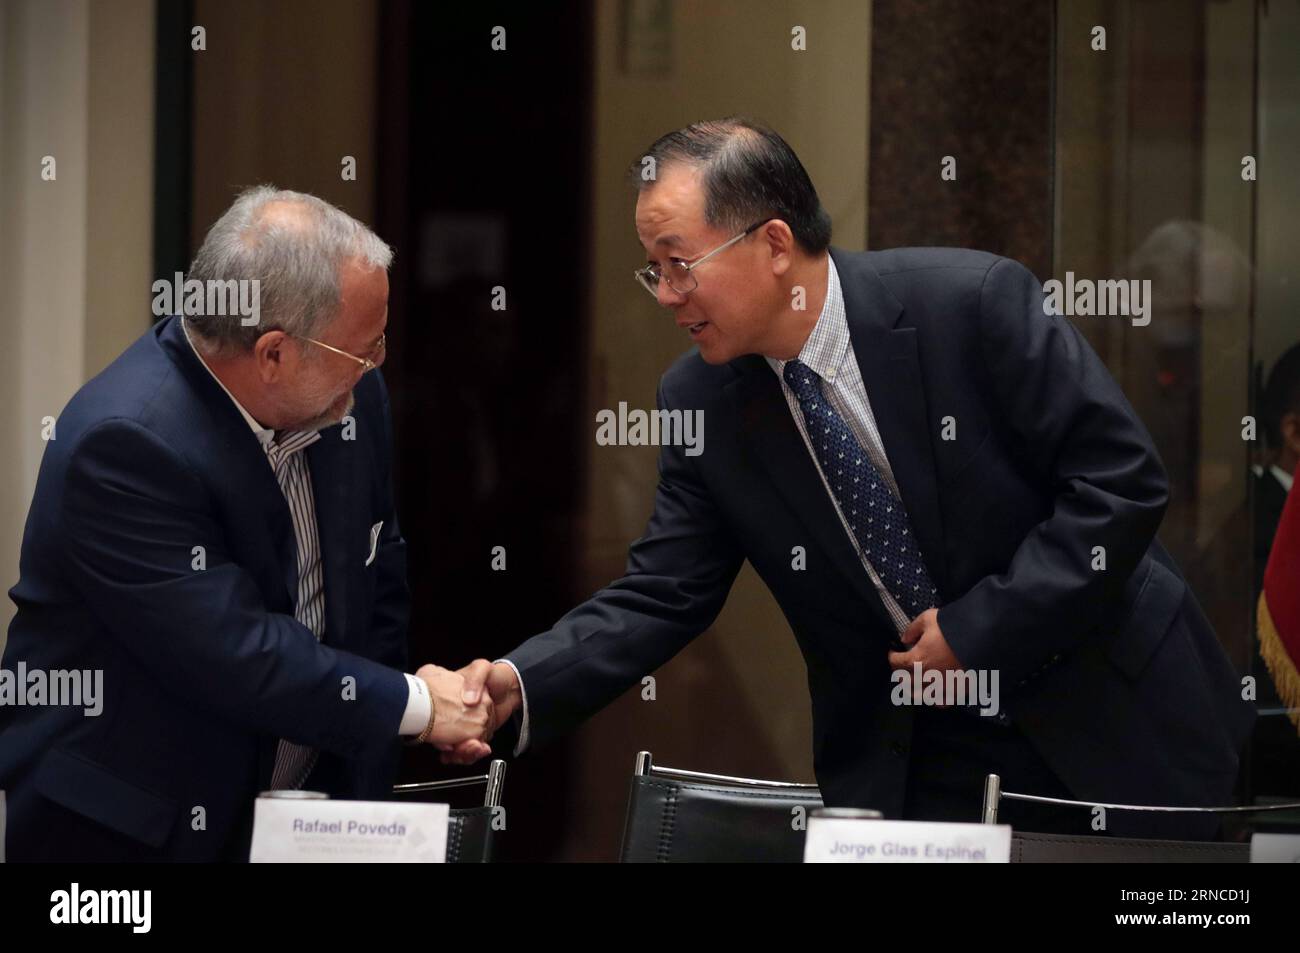 QUITO, April 4, 2016 -- Chen Weilong (R), representative of China s Sinopec International and a member of Penaturi Consortium, shakes hands with Jose Icaza, manager of Petroamazonas of Ecuador, after the signing of a service contract in the Protocolar Hall of Ecuador s Vicepresidency, in Quito, capital of Ecuador, on April 4, 2016. Ecuador s government-owned Petroamazonas signed nine service contracts on Monday with international consortiums in efforts to develop its mature oil fields. Panaturi Consortium, made up of China s Sinopec International and Sinopec Service Ecuador, will be in charge Stock Photo